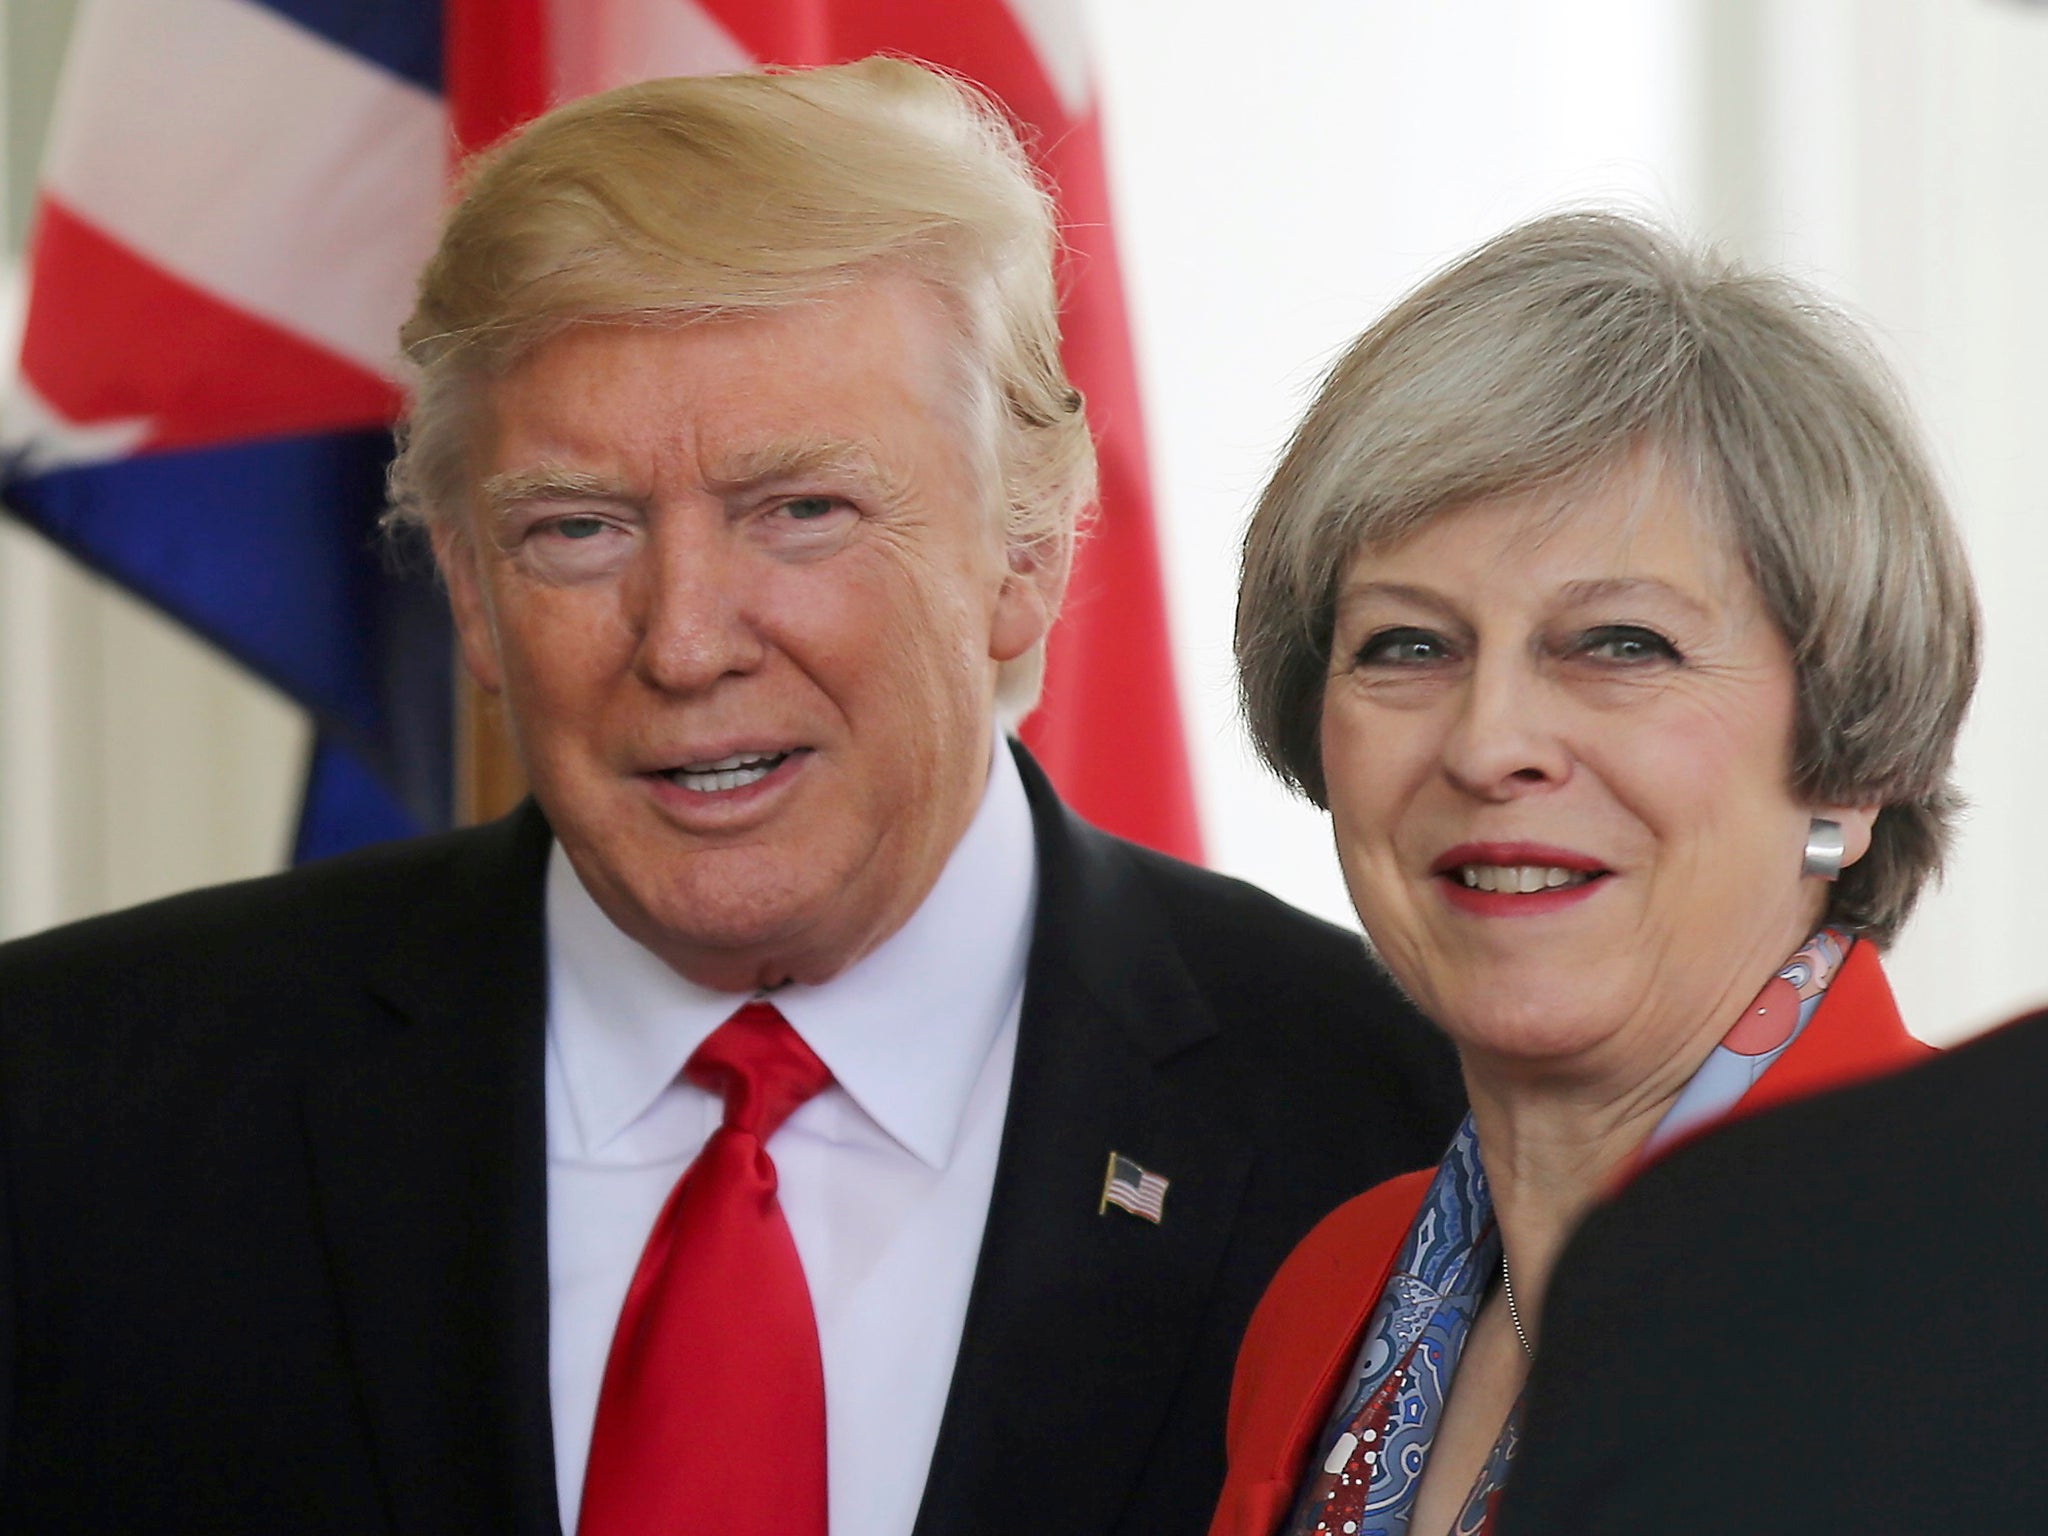 US President Donald Trump greets British Prime MinisterTheresa May as she arrives at the White House in Washington DC